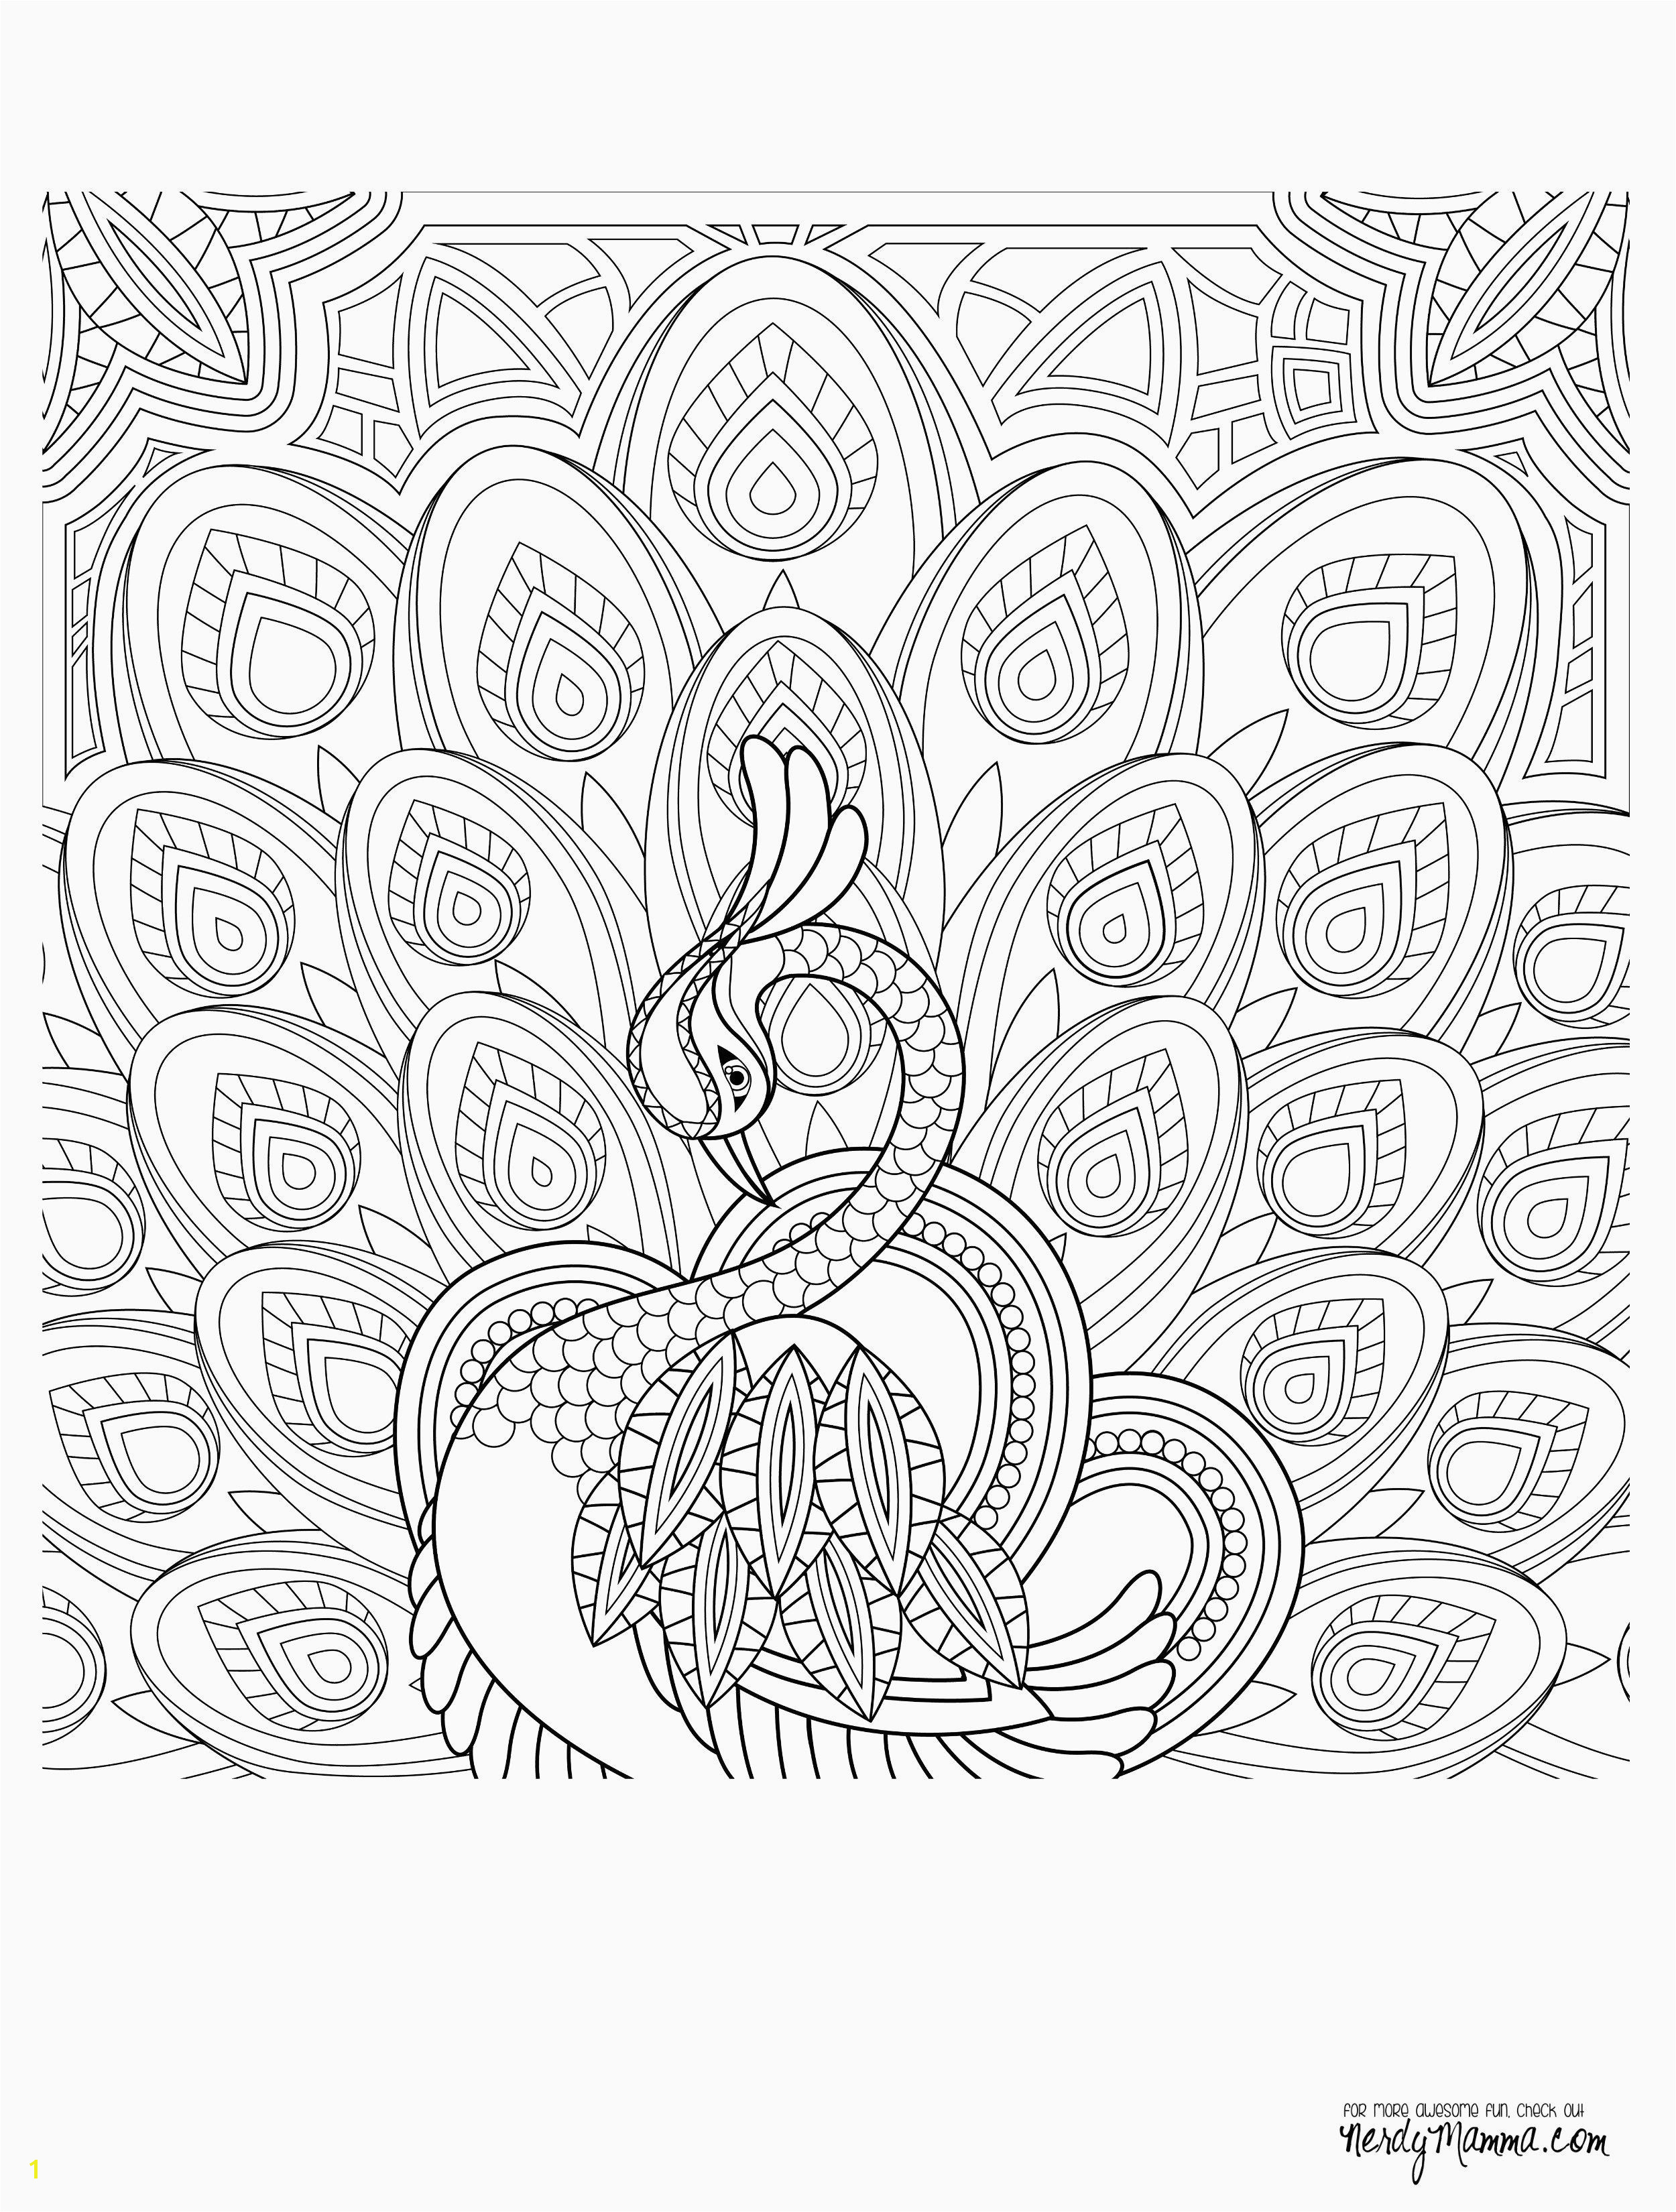 Printable Color Pages for Adults Free Printable Coloring Pages for Adults Best Awesome Coloring